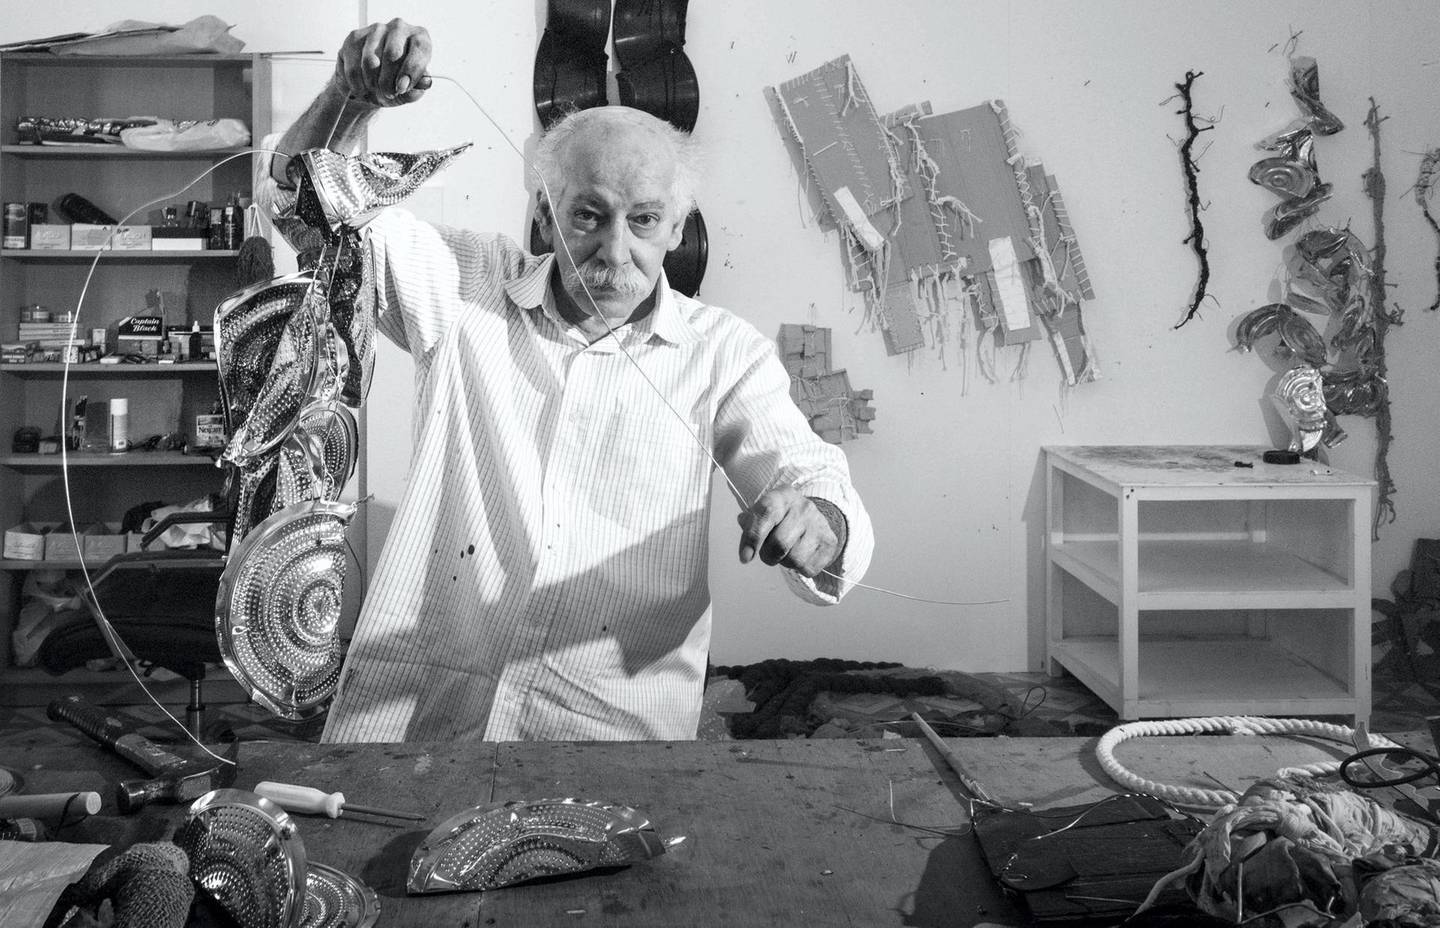 Hassan Sharif at work in his studio, the contents of which have been donated to the Sharjah Art Foundation. Courtesy Sharjah Art Foundation/ Estate of Hassan Sharif